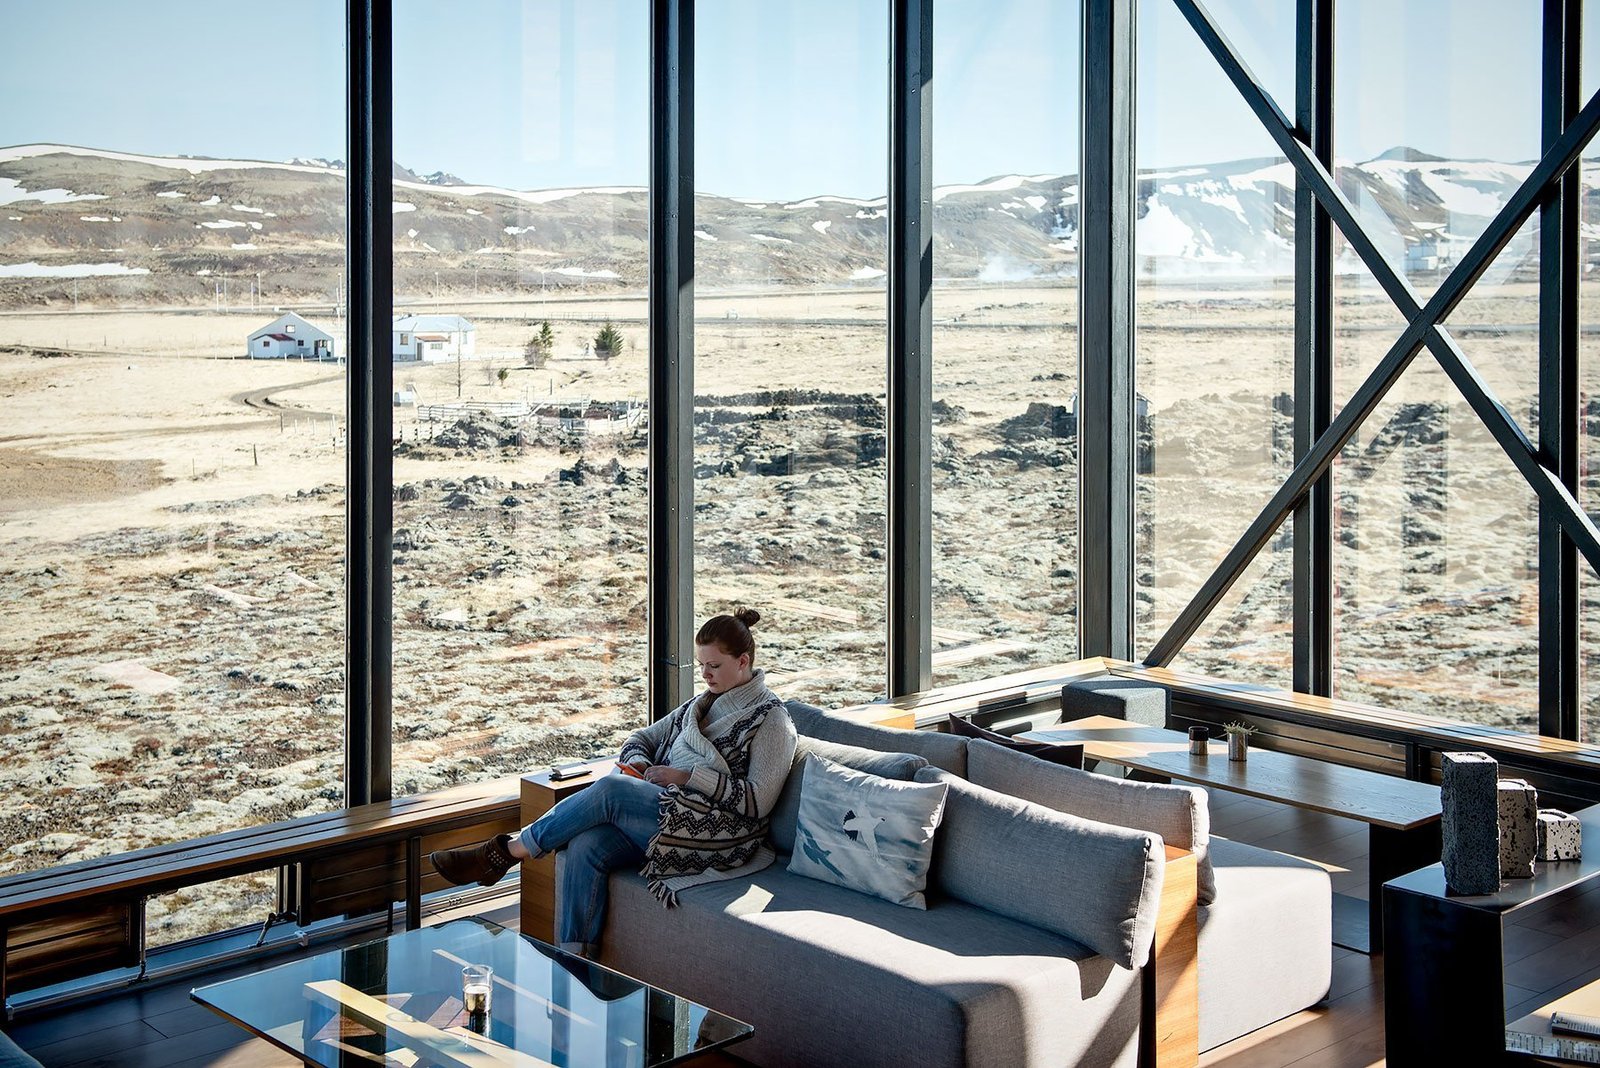 Where to stay in Iceland: ION Hotel, a luxury design hotel near the Golden Circle. The Northern Lights bar.